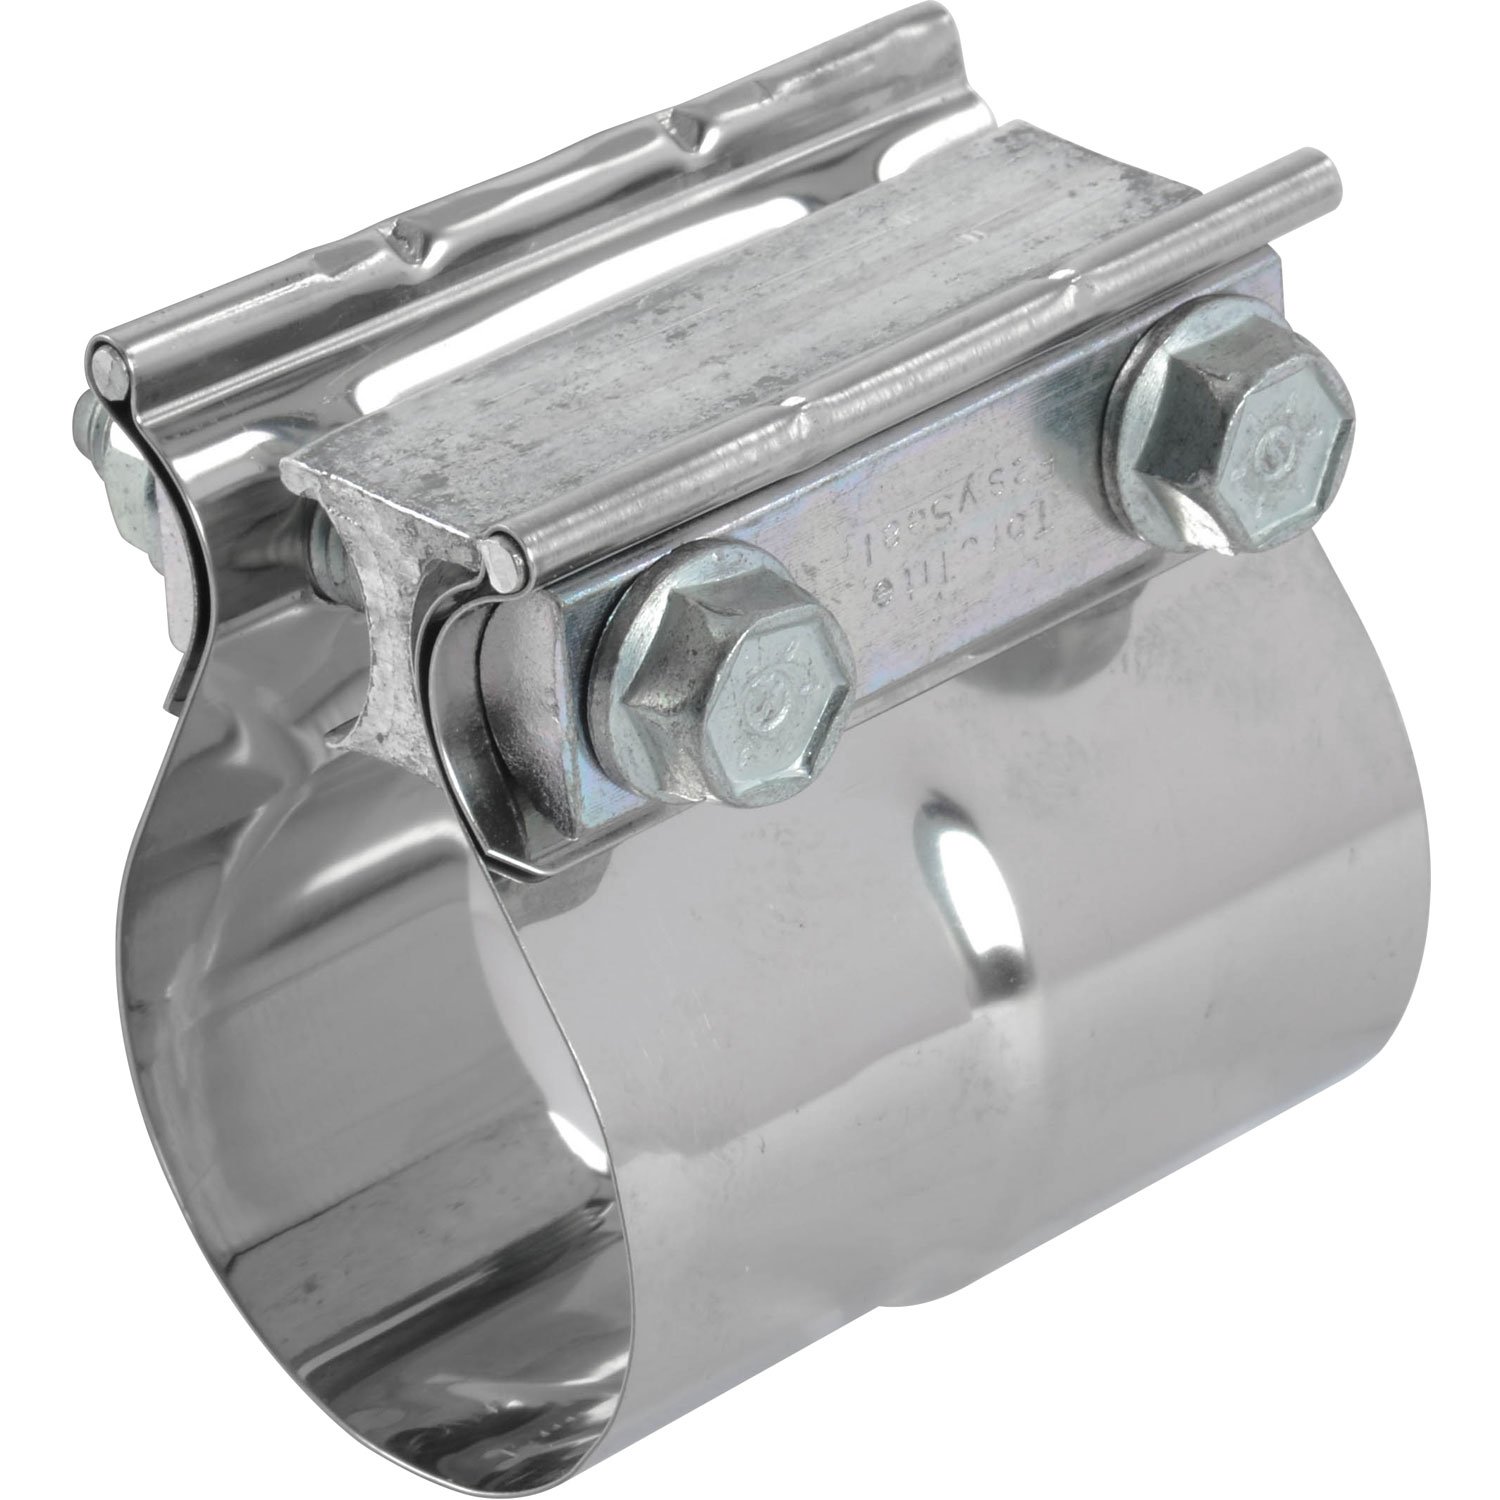 Preformed Exhaust Lap Joint Band Clamp for I.D.